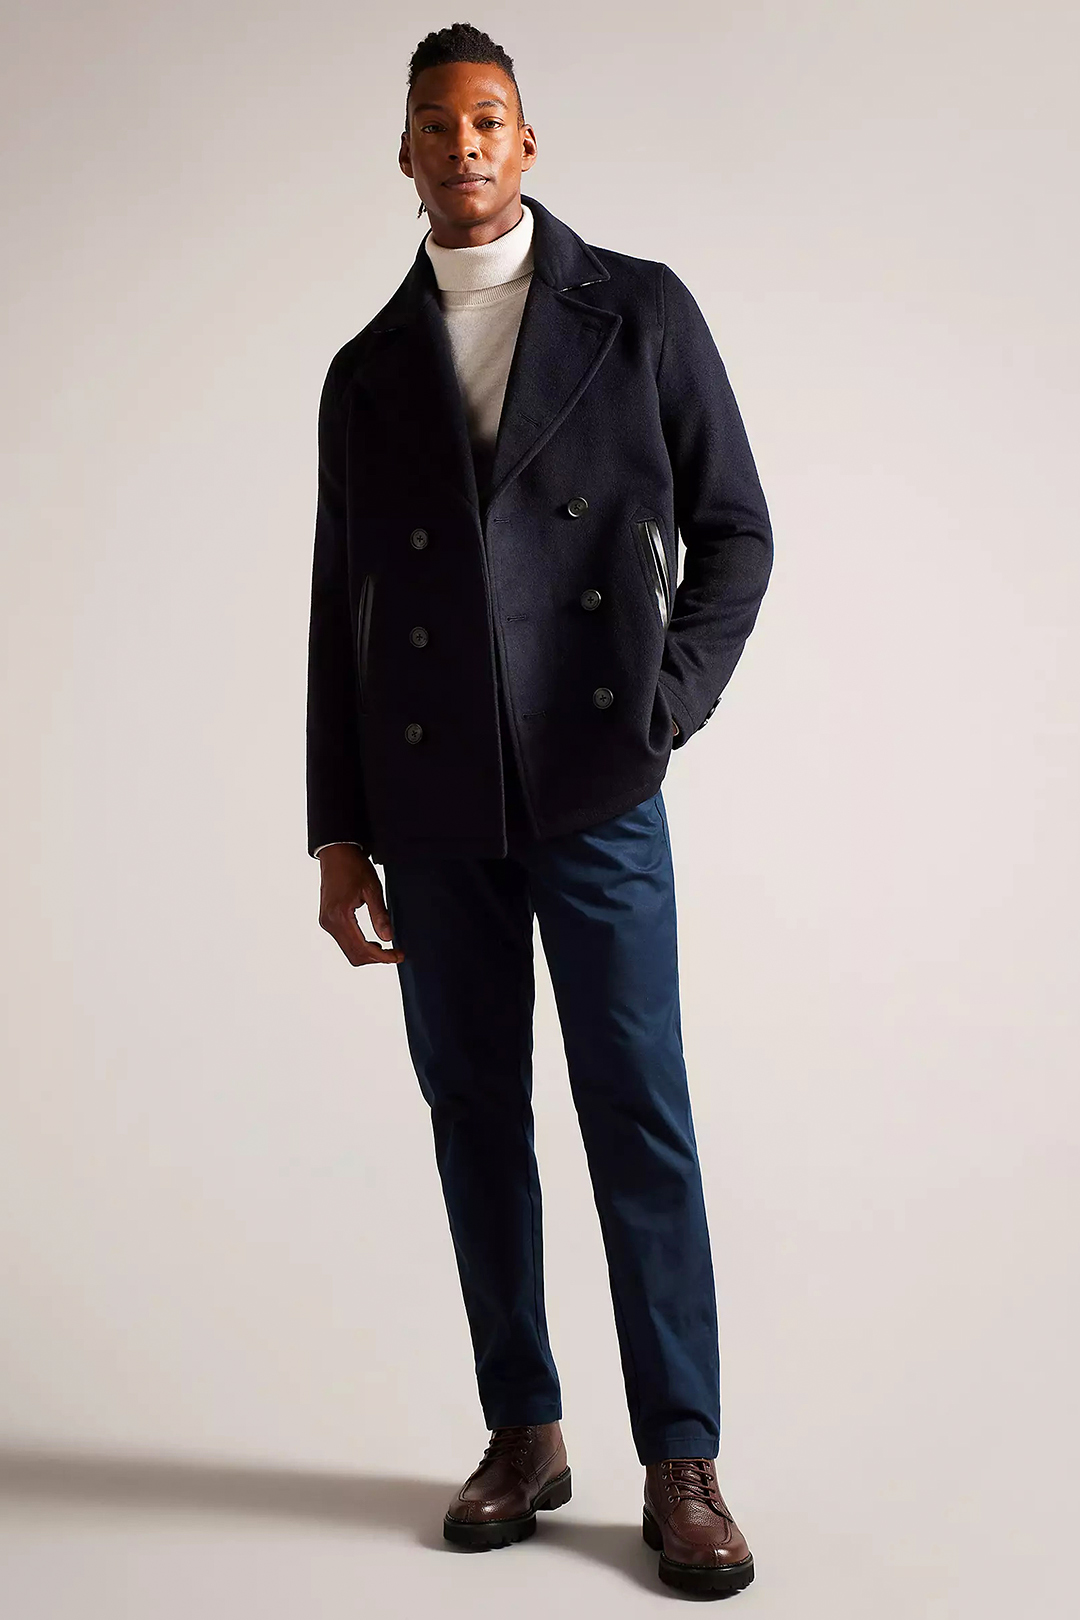 Navy pea coat, white turtleneck, blue dress pants, and brown lace up boots outfit